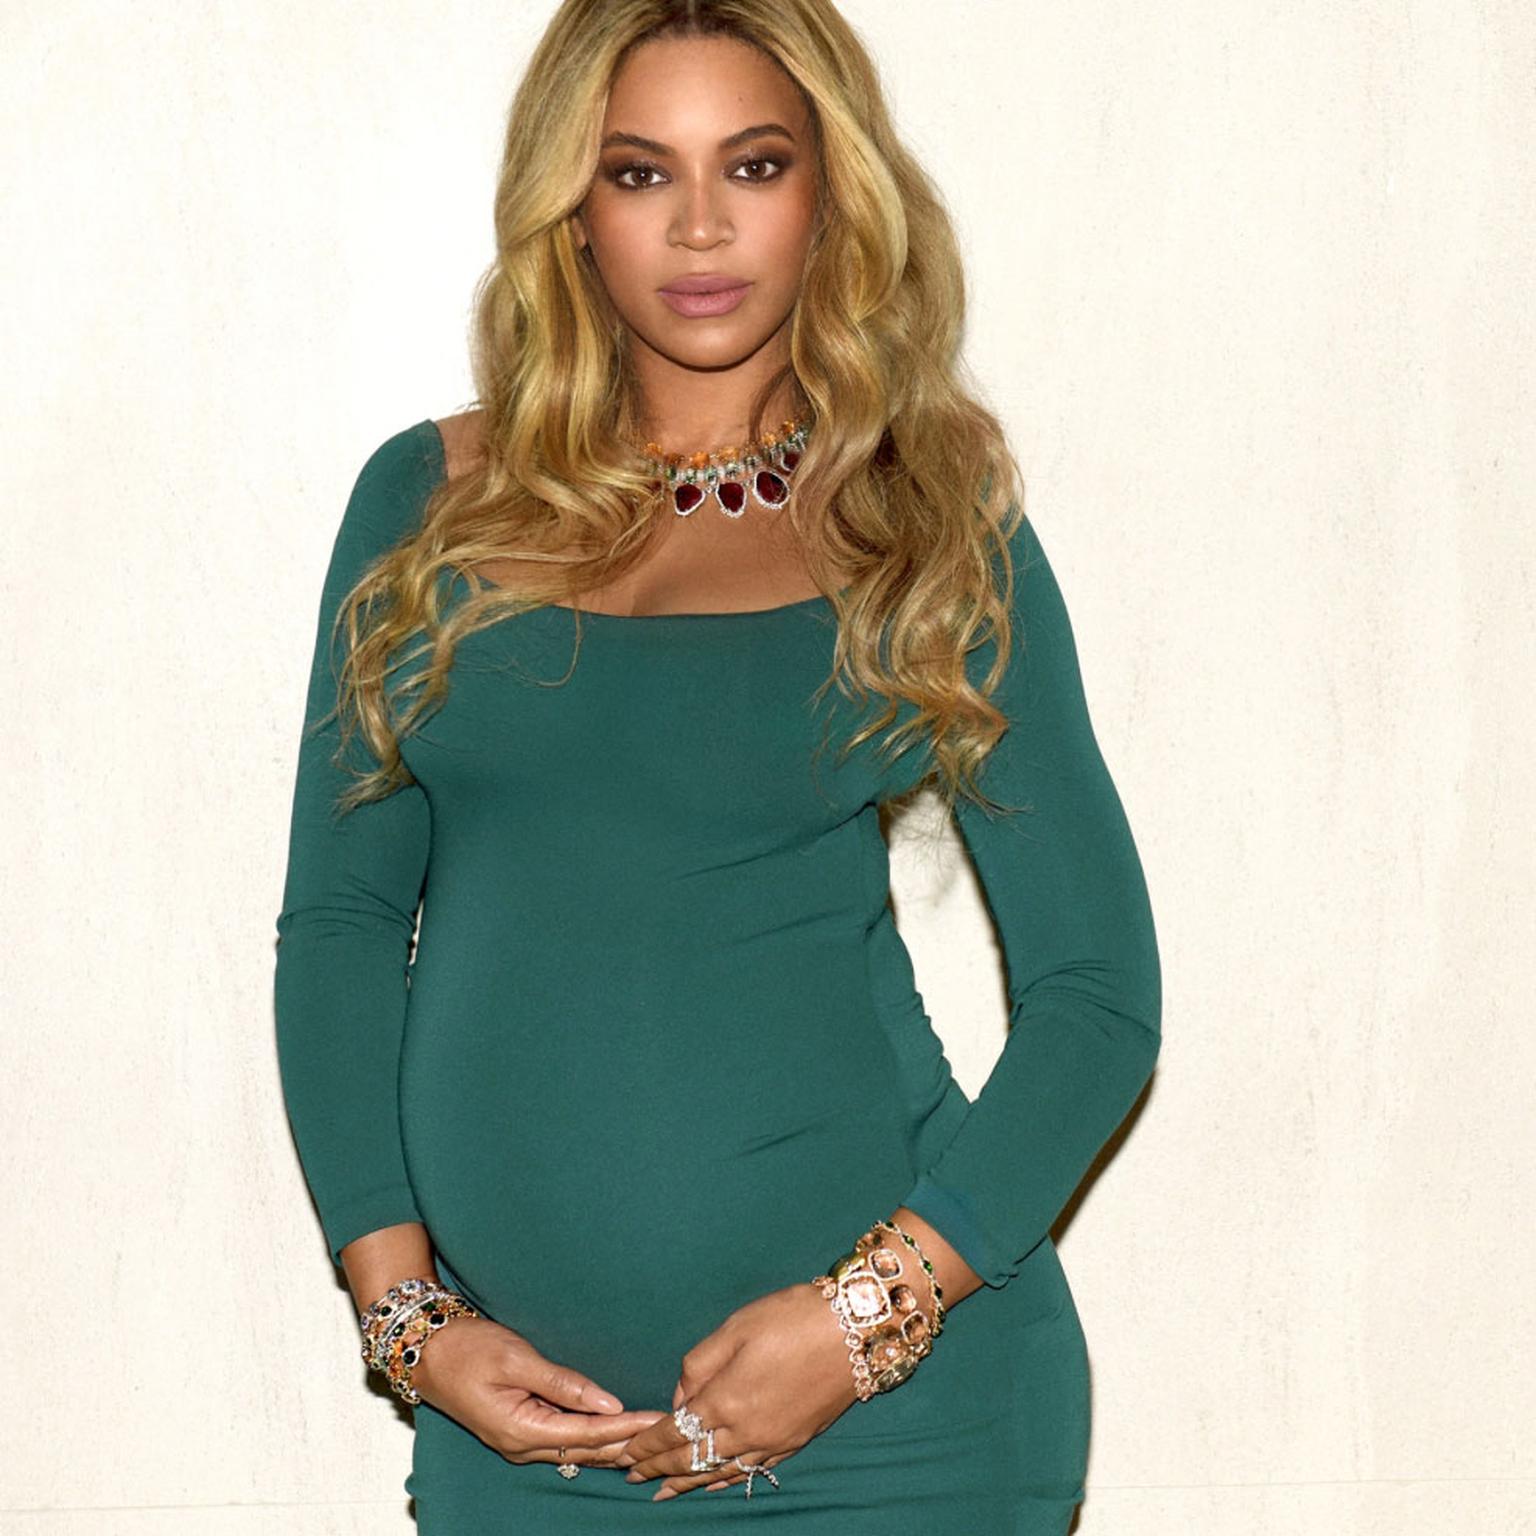 Beyonce wearing Le Vian jewellery to the pre-Oscar party